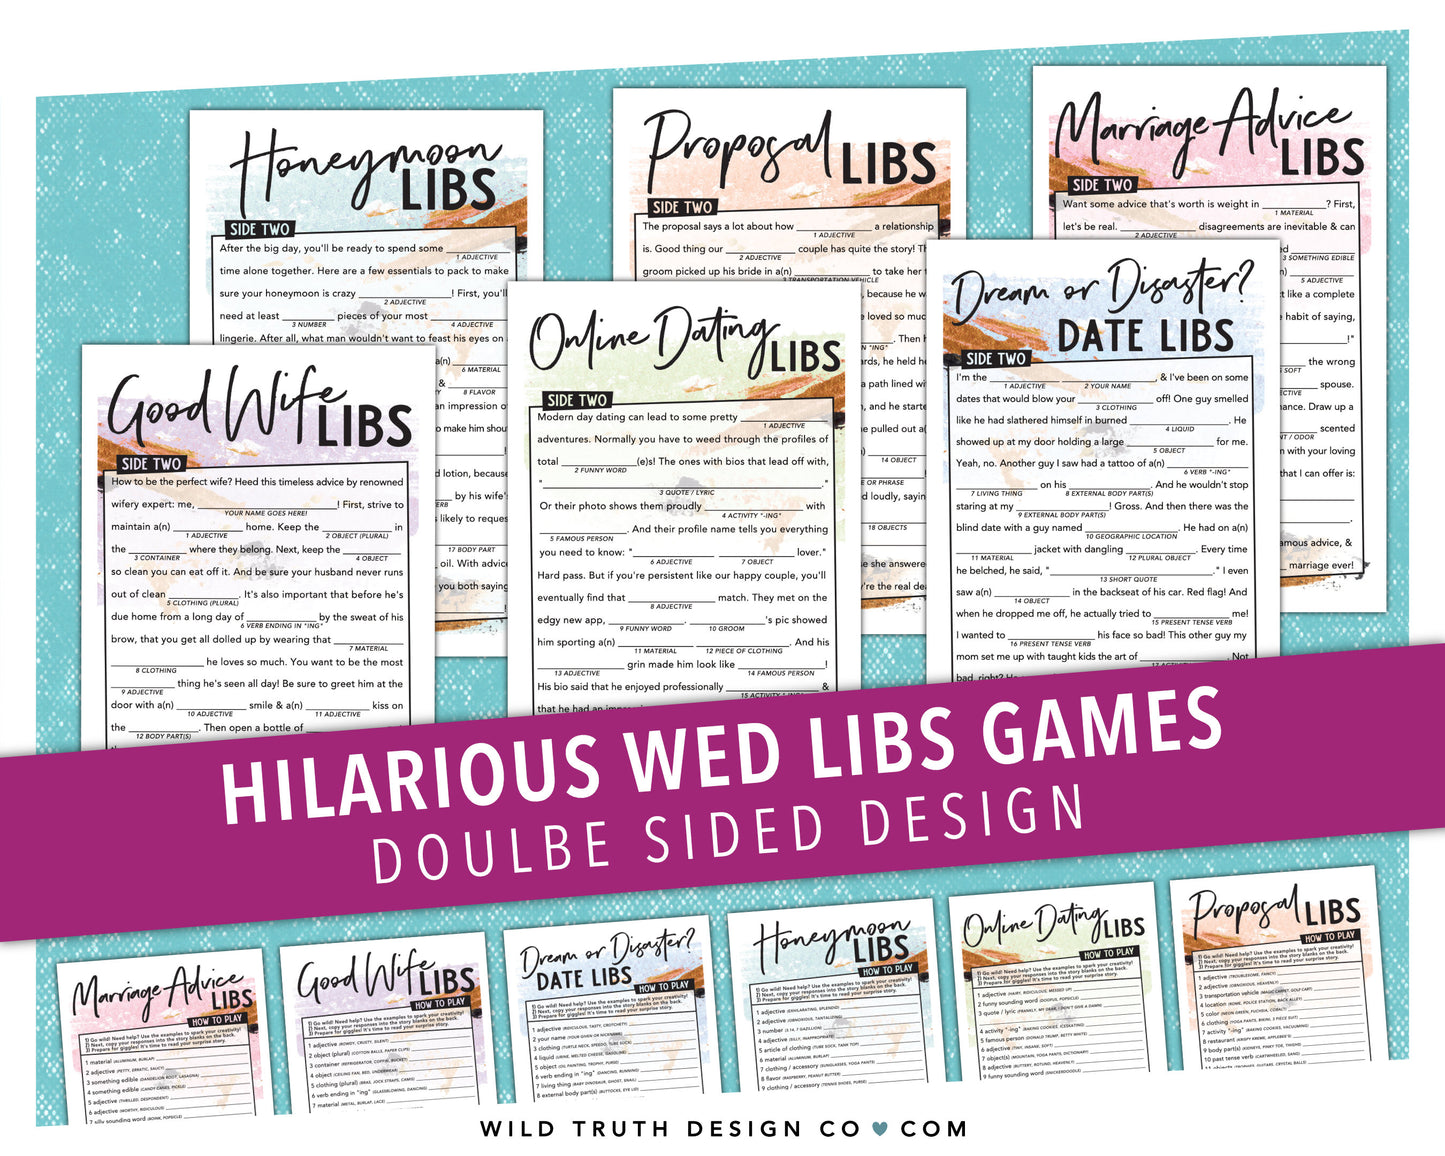 Double Sided Wedding Mad Libs Bundle - Hilarious Wedding Mad Libs - Wed Libs - Marriage Advice Mad Libs - Marriage Vows Mad Libs - Proposal Story - Honeymoon